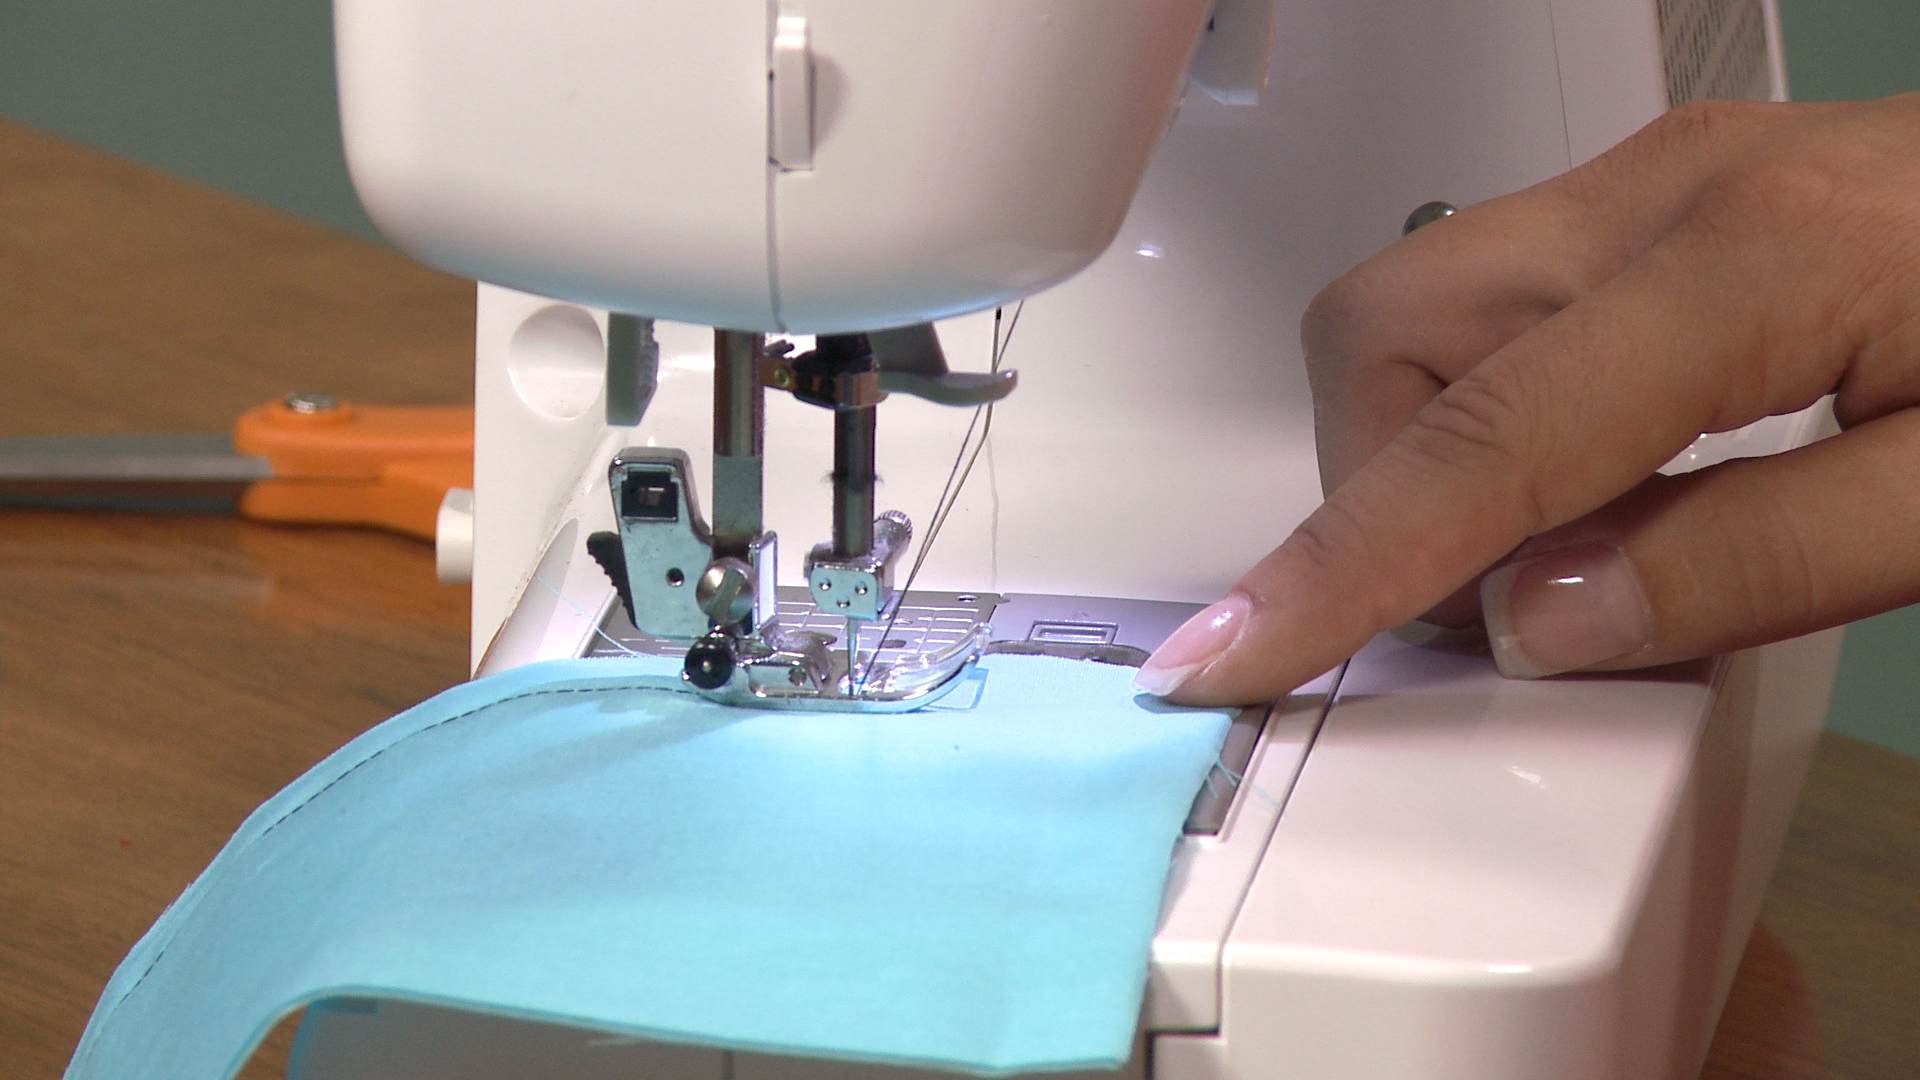 Session 6: How to Sew